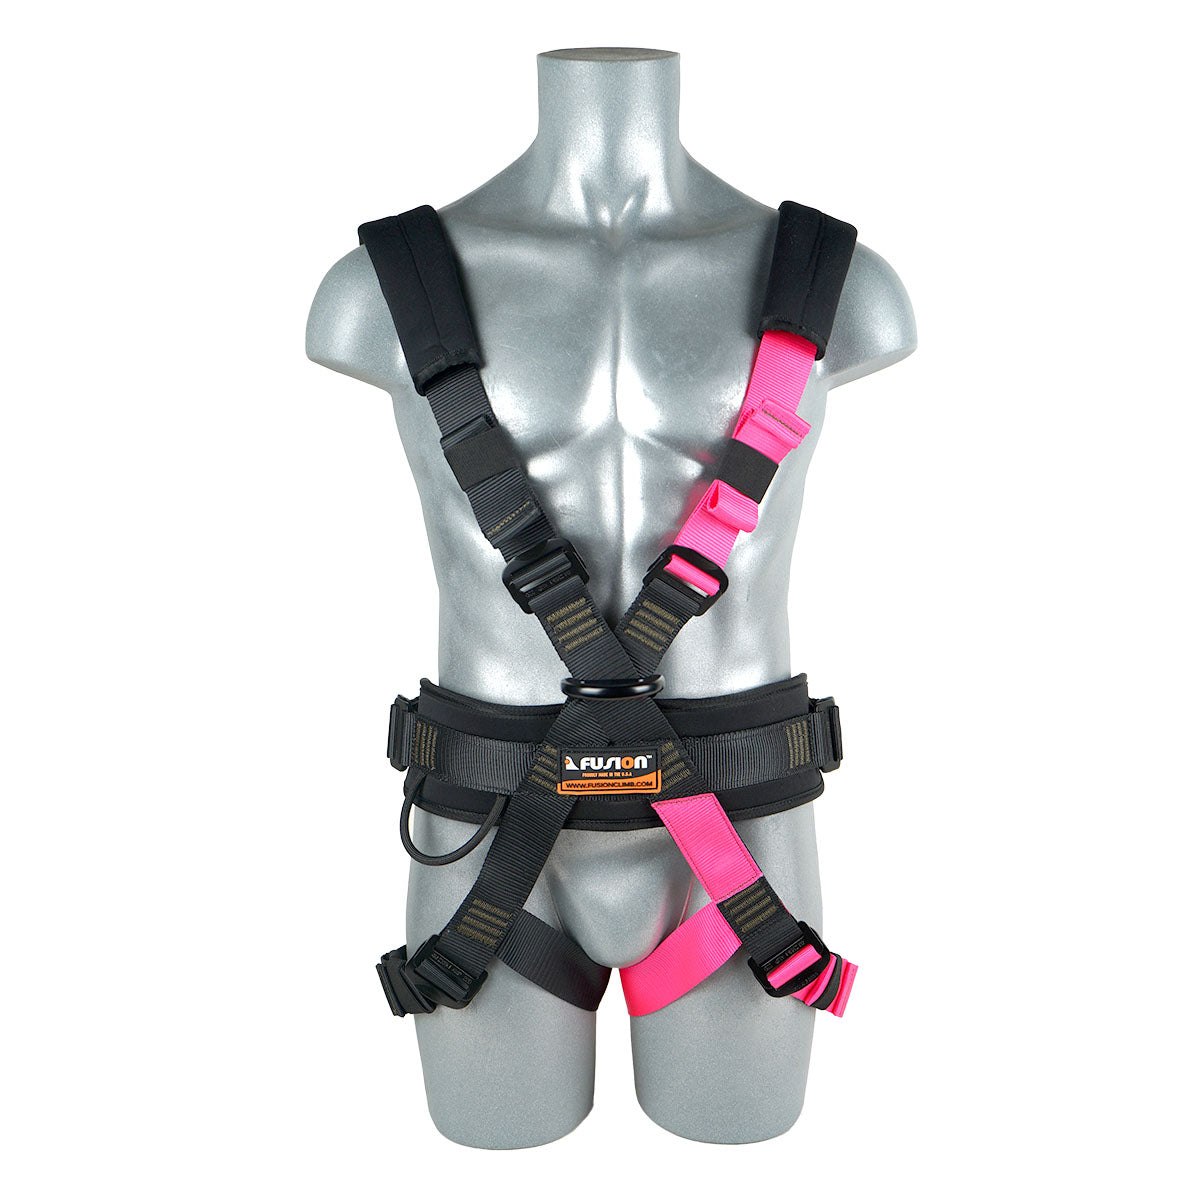 Magma Challenge Course Full Body Harness - Pink & Black